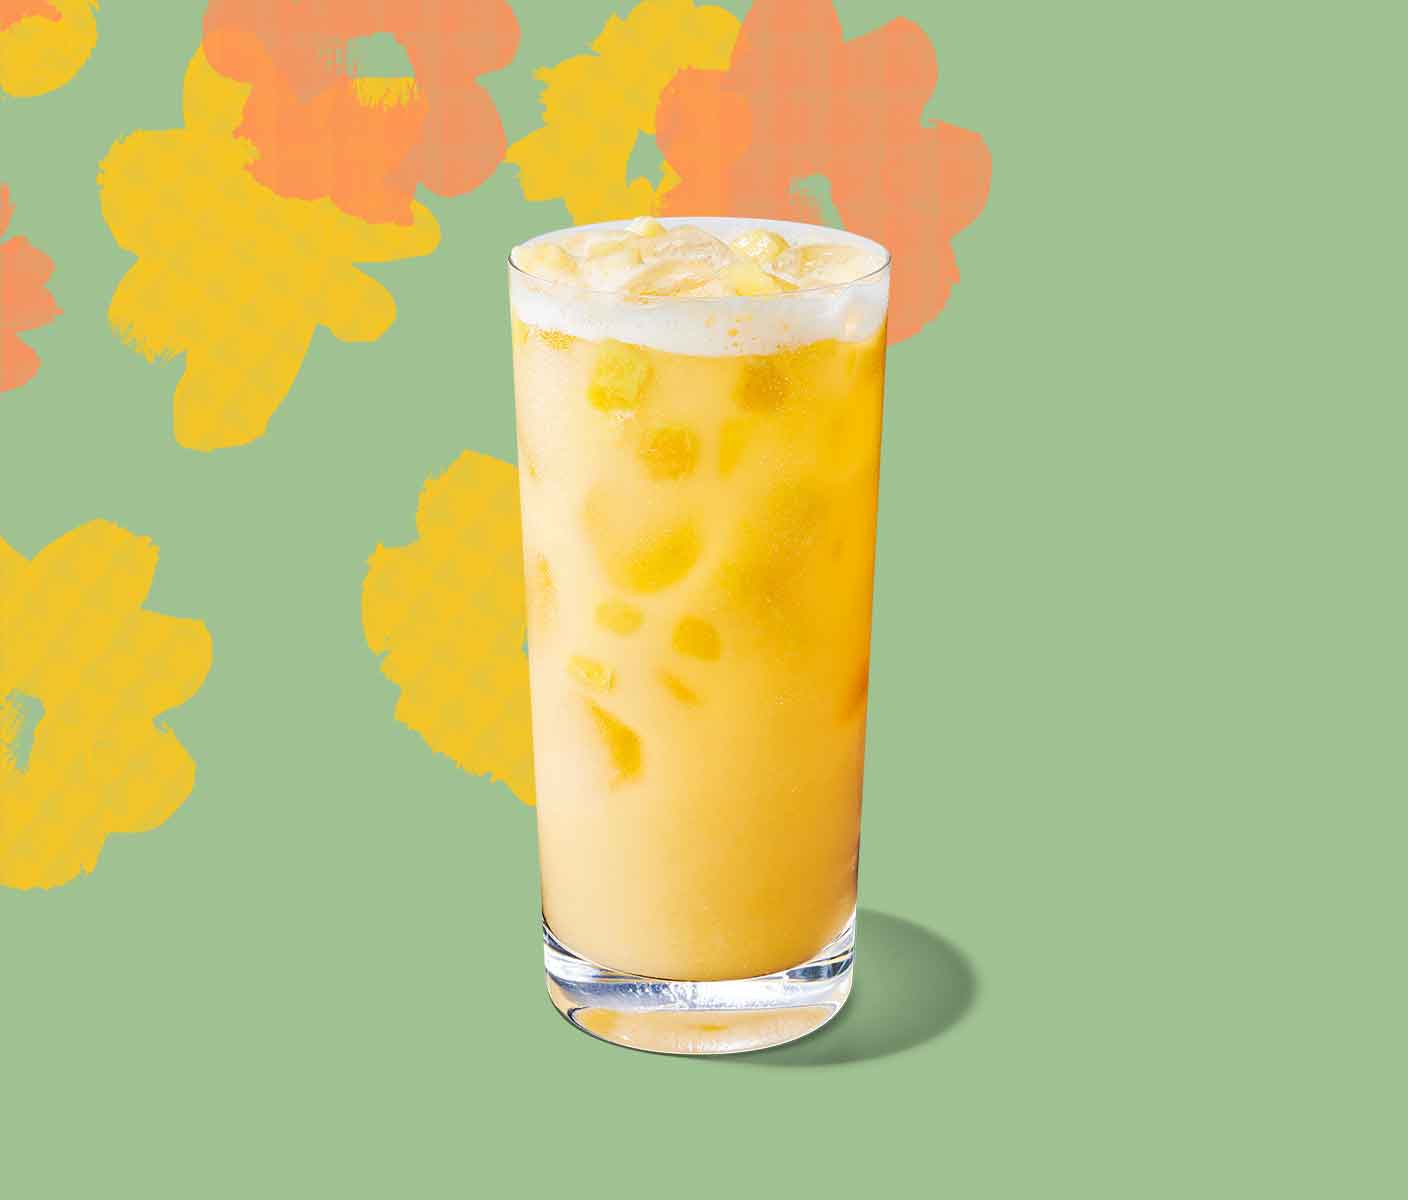 Creamy yellow iced drink with pineapple inclusions in a tall glass.